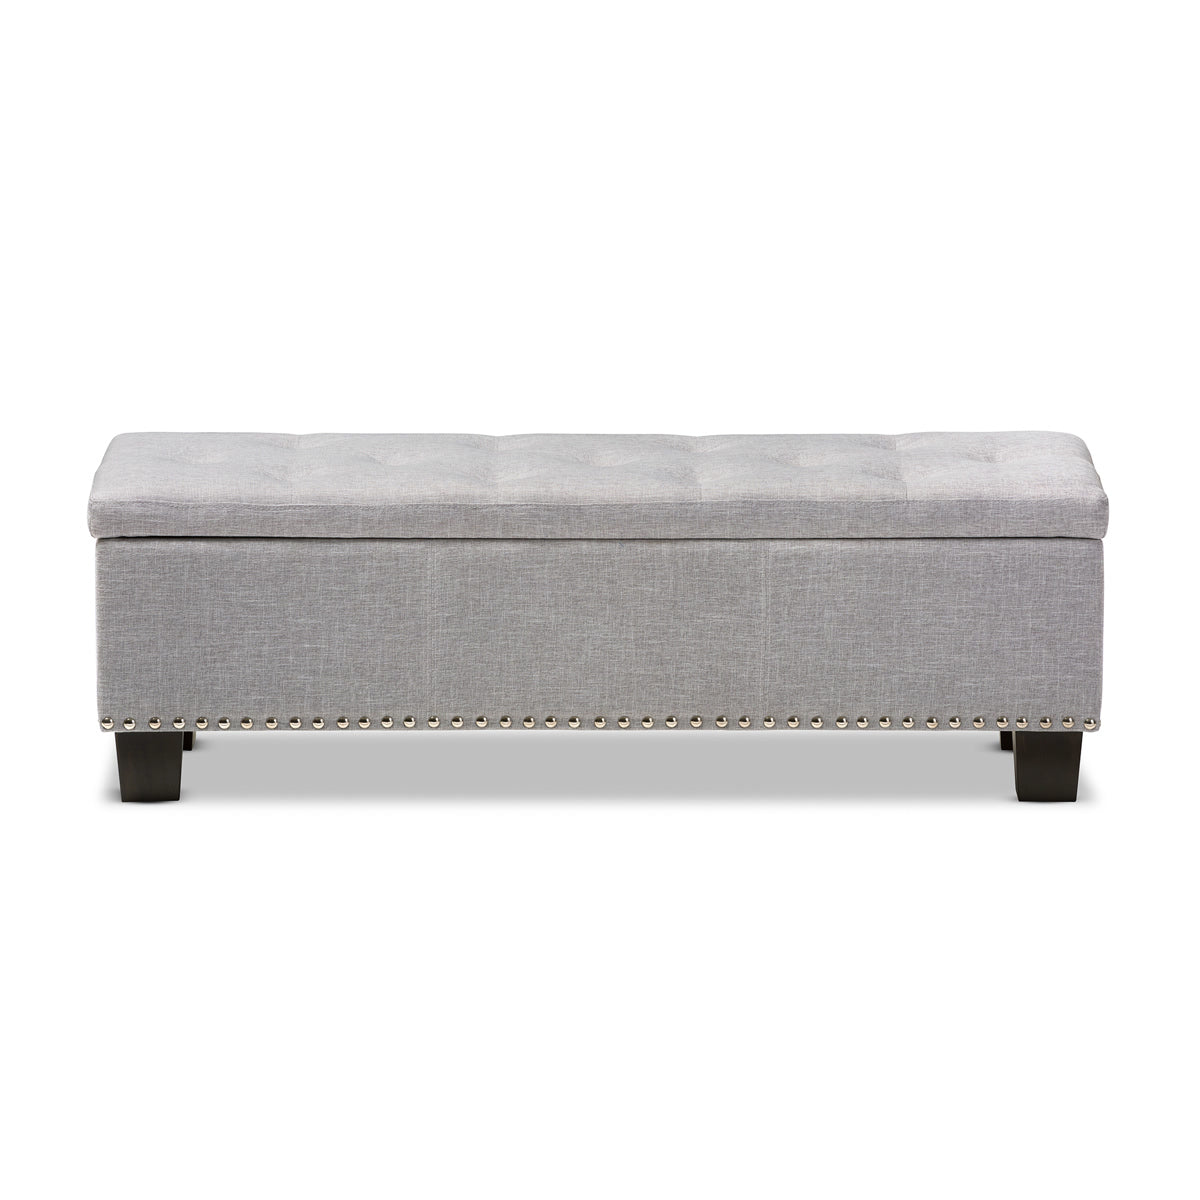 Baxton Studio Hannah Modern and Contemporary Grayish Beige Fabric Upholstered Button-Tufting Storage Ottoman Bench Baxton Studio-benches-Minimal And Modern - 4